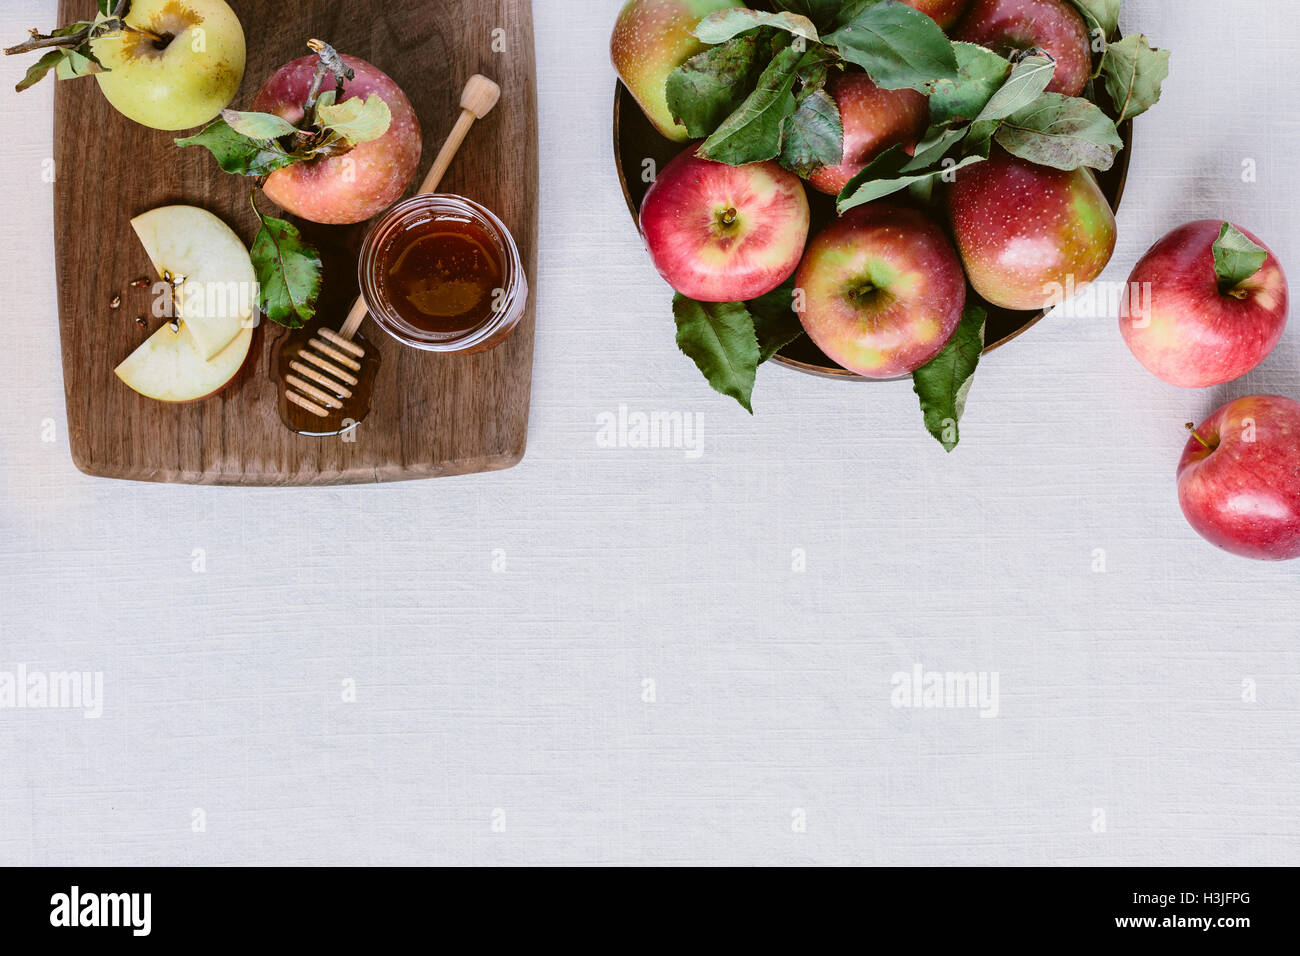 Freshly picked apples and honey are displayed on a white backdrop and photographed from the top view. Stock Photo